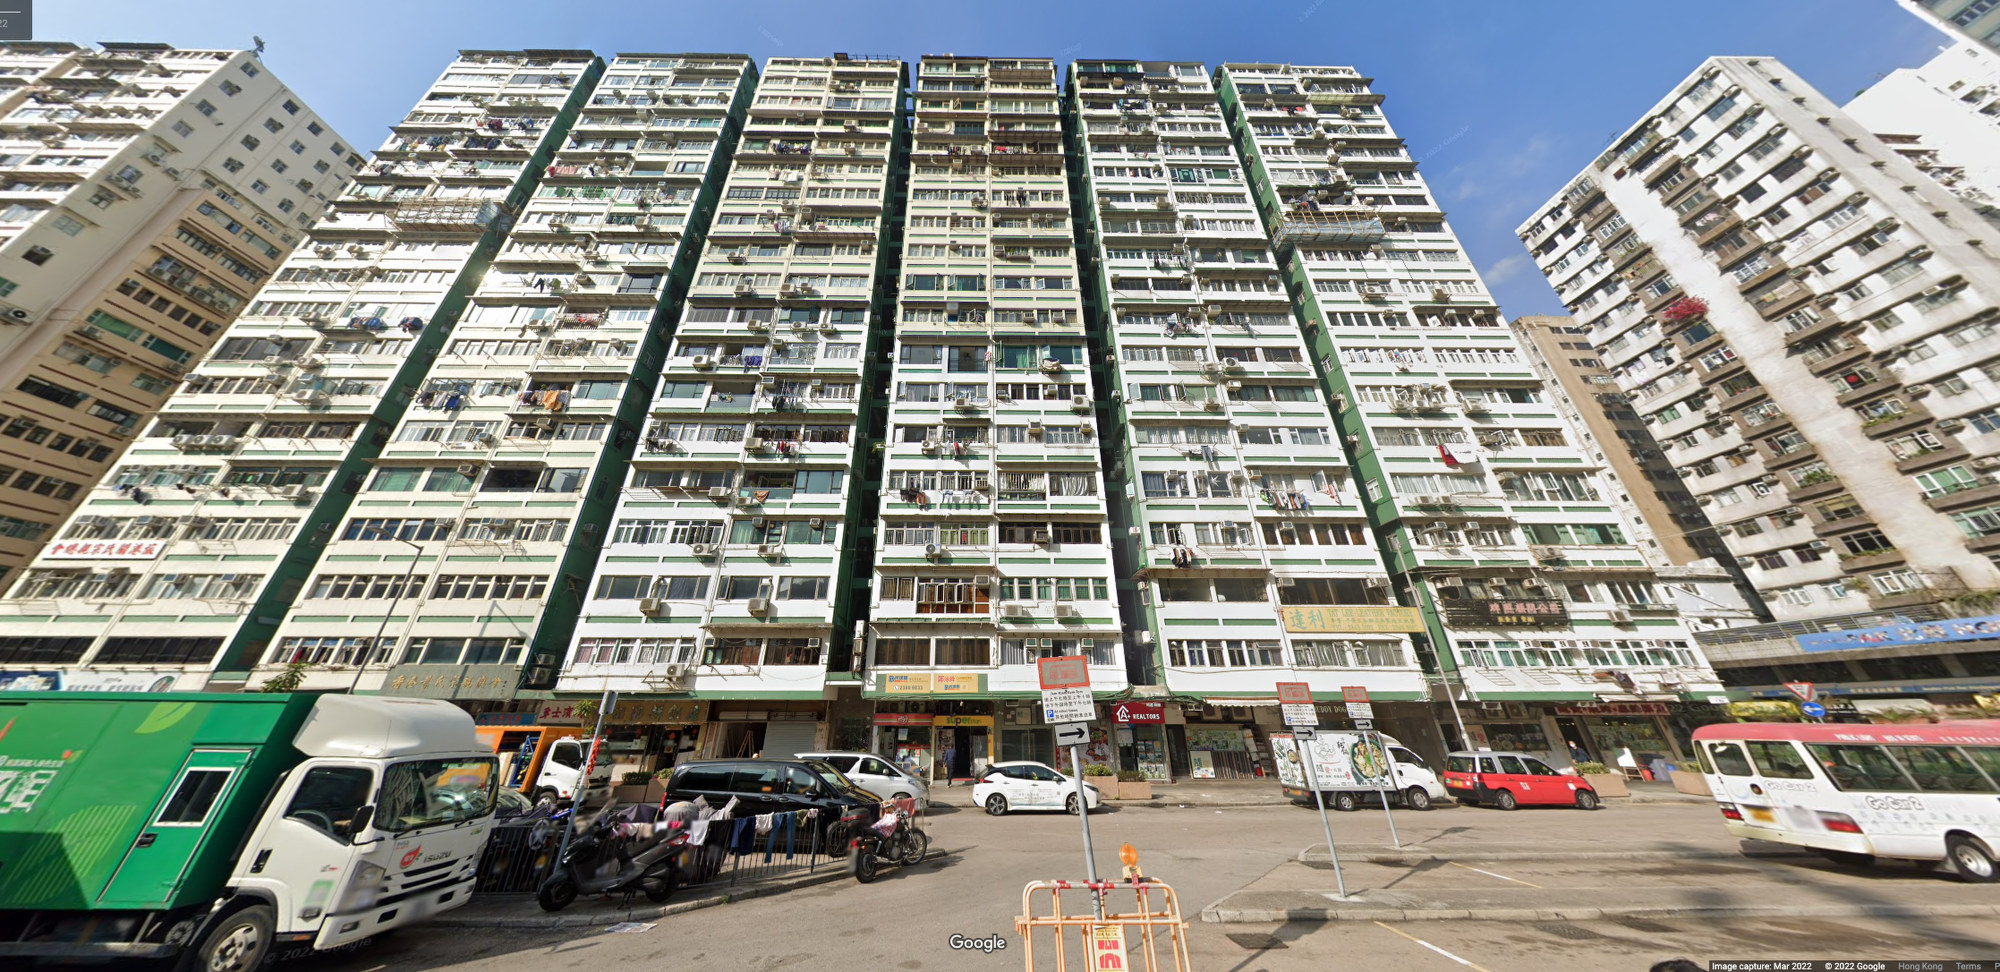 The Man Wah Building in Man Wui Street where the robbery took place. Photo: Google